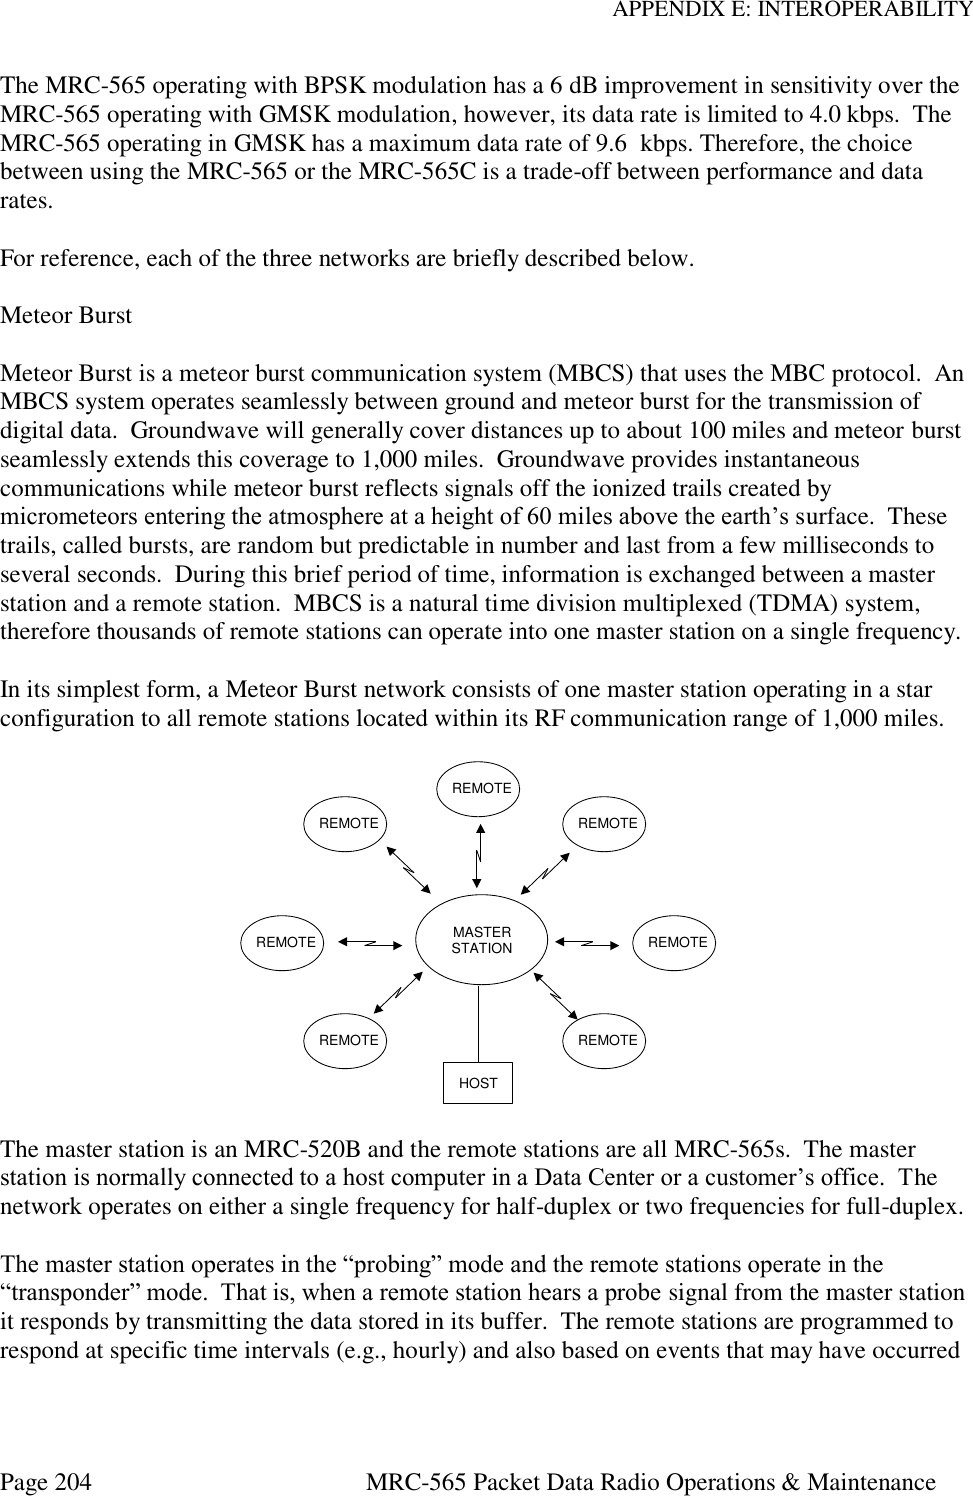 APPENDIX E: INTEROPERABILITY Page 204  MRC-565 Packet Data Radio Operations &amp; Maintenance The MRC-565 operating with BPSK modulation has a 6 dB improvement in sensitivity over the MRC-565 operating with GMSK modulation, however, its data rate is limited to 4.0 kbps.  The MRC-565 operating in GMSK has a maximum data rate of 9.6  kbps. Therefore, the choice between using the MRC-565 or the MRC-565C is a trade-off between performance and data rates.  For reference, each of the three networks are briefly described below.  Meteor Burst  Meteor Burst is a meteor burst communication system (MBCS) that uses the MBC protocol.  An MBCS system operates seamlessly between ground and meteor burst for the transmission of digital data.  Groundwave will generally cover distances up to about 100 miles and meteor burst seamlessly extends this coverage to 1,000 miles.  Groundwave provides instantaneous communications while meteor burst reflects signals off the ionized trails created by micrometeors entering the atmosphere at a height of 60 miles above the earth’s surface.  These trails, called bursts, are random but predictable in number and last from a few milliseconds to several seconds.  During this brief period of time, information is exchanged between a master station and a remote station.  MBCS is a natural time division multiplexed (TDMA) system, therefore thousands of remote stations can operate into one master station on a single frequency.  In its simplest form, a Meteor Burst network consists of one master station operating in a star configuration to all remote stations located within its RF communication range of 1,000 miles.   The master station is an MRC-520B and the remote stations are all MRC-565s.  The master station is normally connected to a host computer in a Data Center or a customer’s office.  The network operates on either a single frequency for half-duplex or two frequencies for full-duplex.  The master station operates in the “probing” mode and the remote stations operate in the “transponder” mode.  That is, when a remote station hears a probe signal from the master station it responds by transmitting the data stored in its buffer.  The remote stations are programmed to respond at specific time intervals (e.g., hourly) and also based on events that may have occurred MASTERSTATIONREMOTEREMOTEREMOTEREMOTEREMOTEREMOTEREMOTEHOST